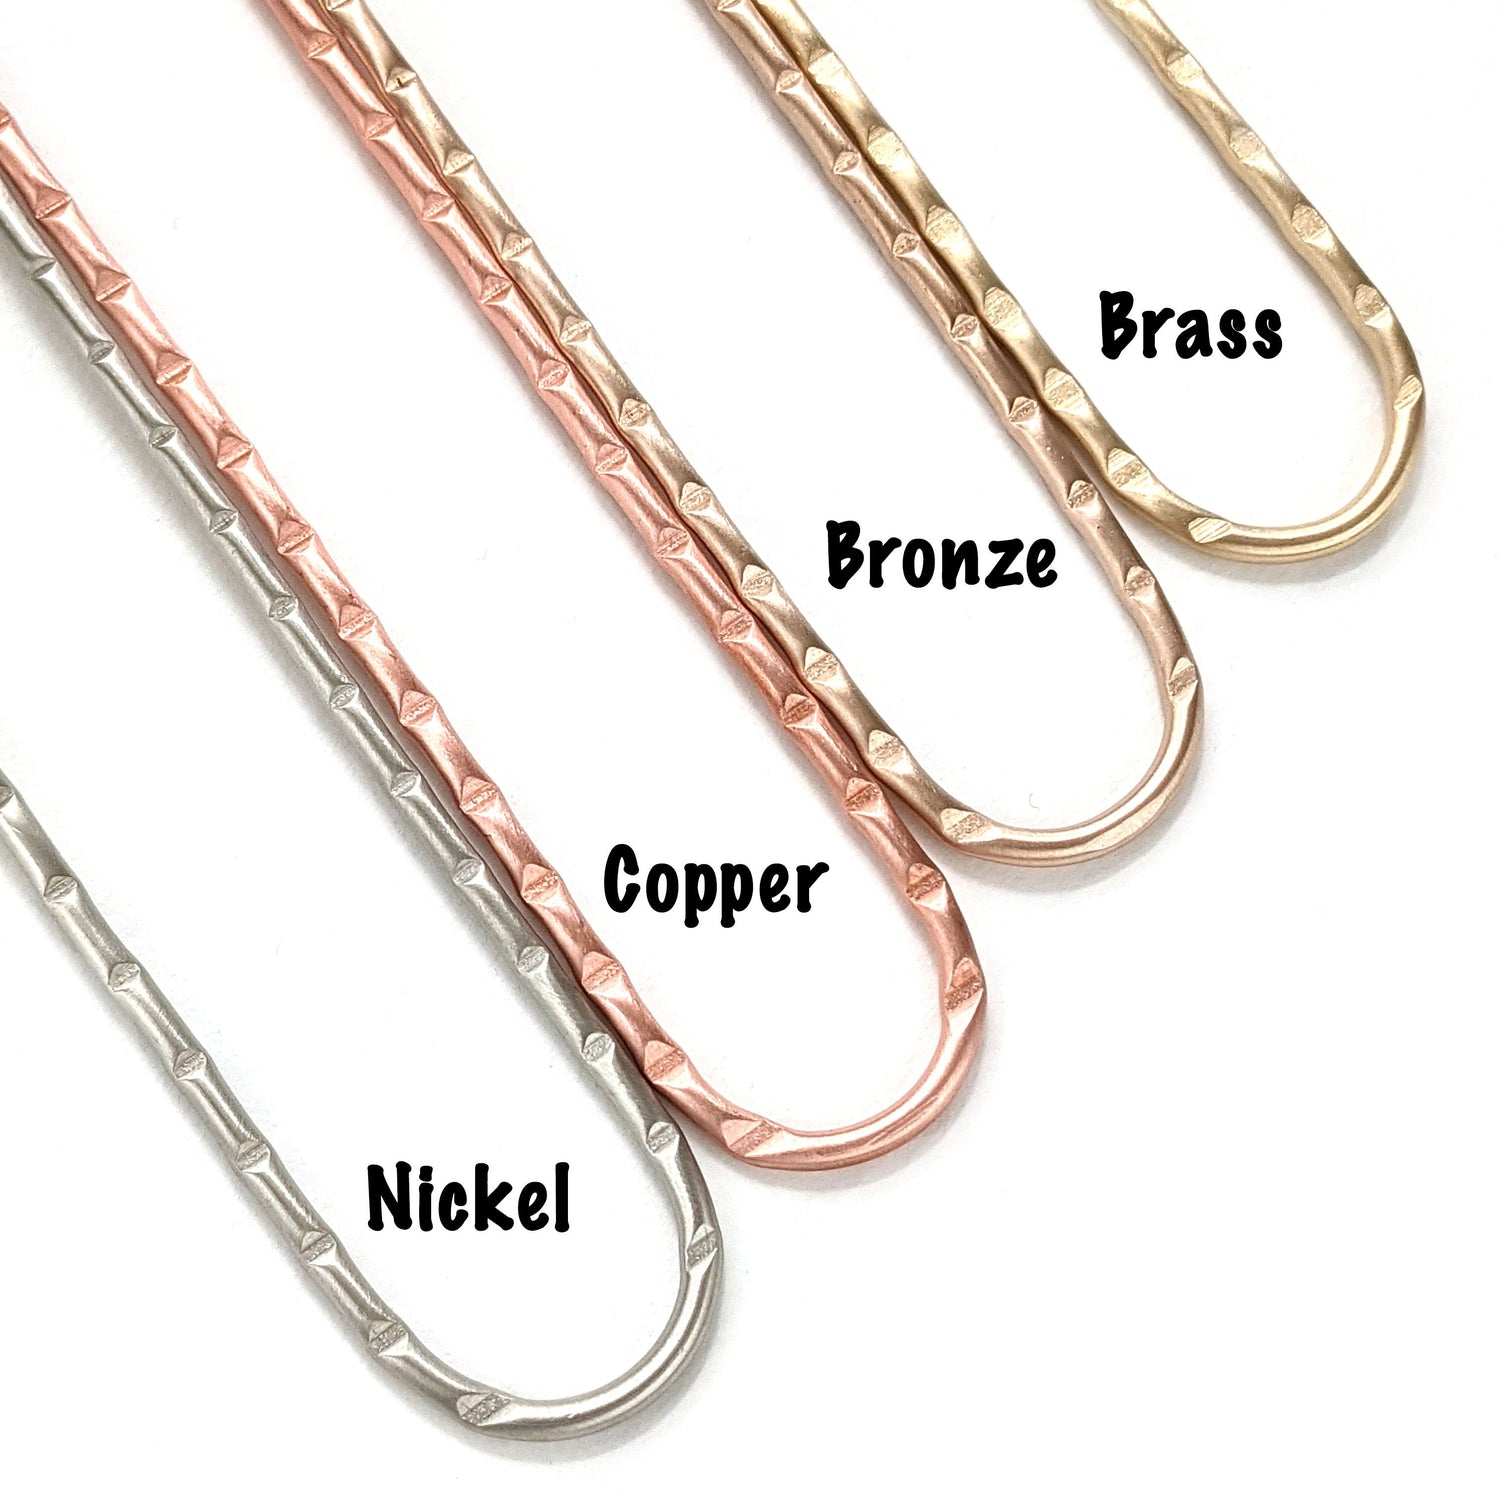 Metal hair forks shown in the four options - nickel, copper, bronze, and brass. This picture shows the detailed deep line grooves in the top portion of each hair stick. The names of the metals are also shown. Hair sticks are an easy alternative to cheap butterfly hair clips for long hairstyles.